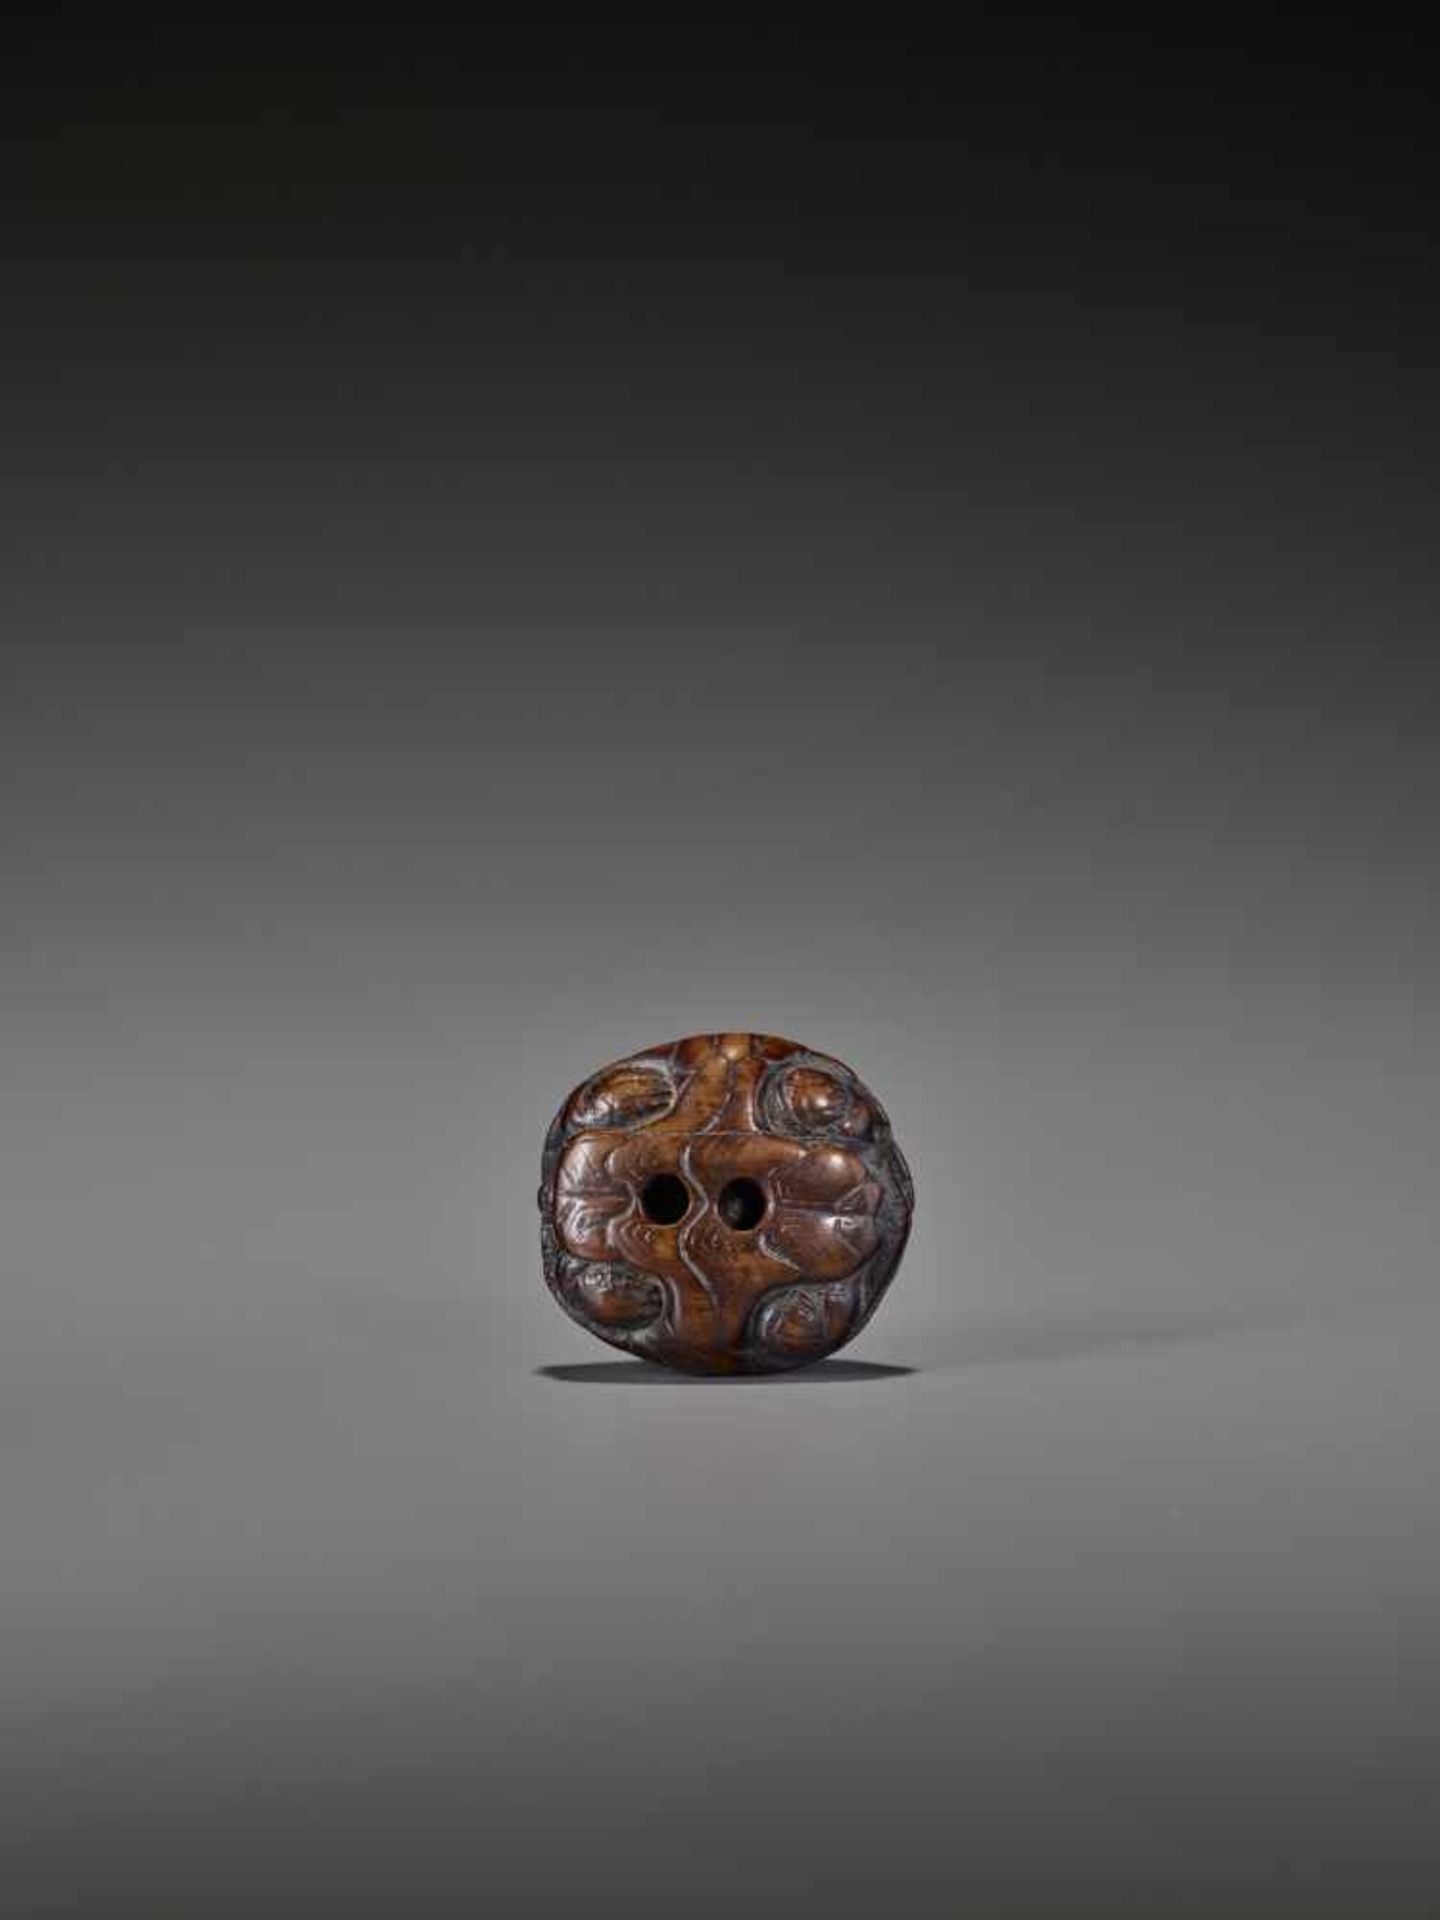 A WOOD NETSUKE OF A RETRACTED TORTOISE UnsignedJapan, 18th century, Edo period (1615-1868)This early - Bild 10 aus 10